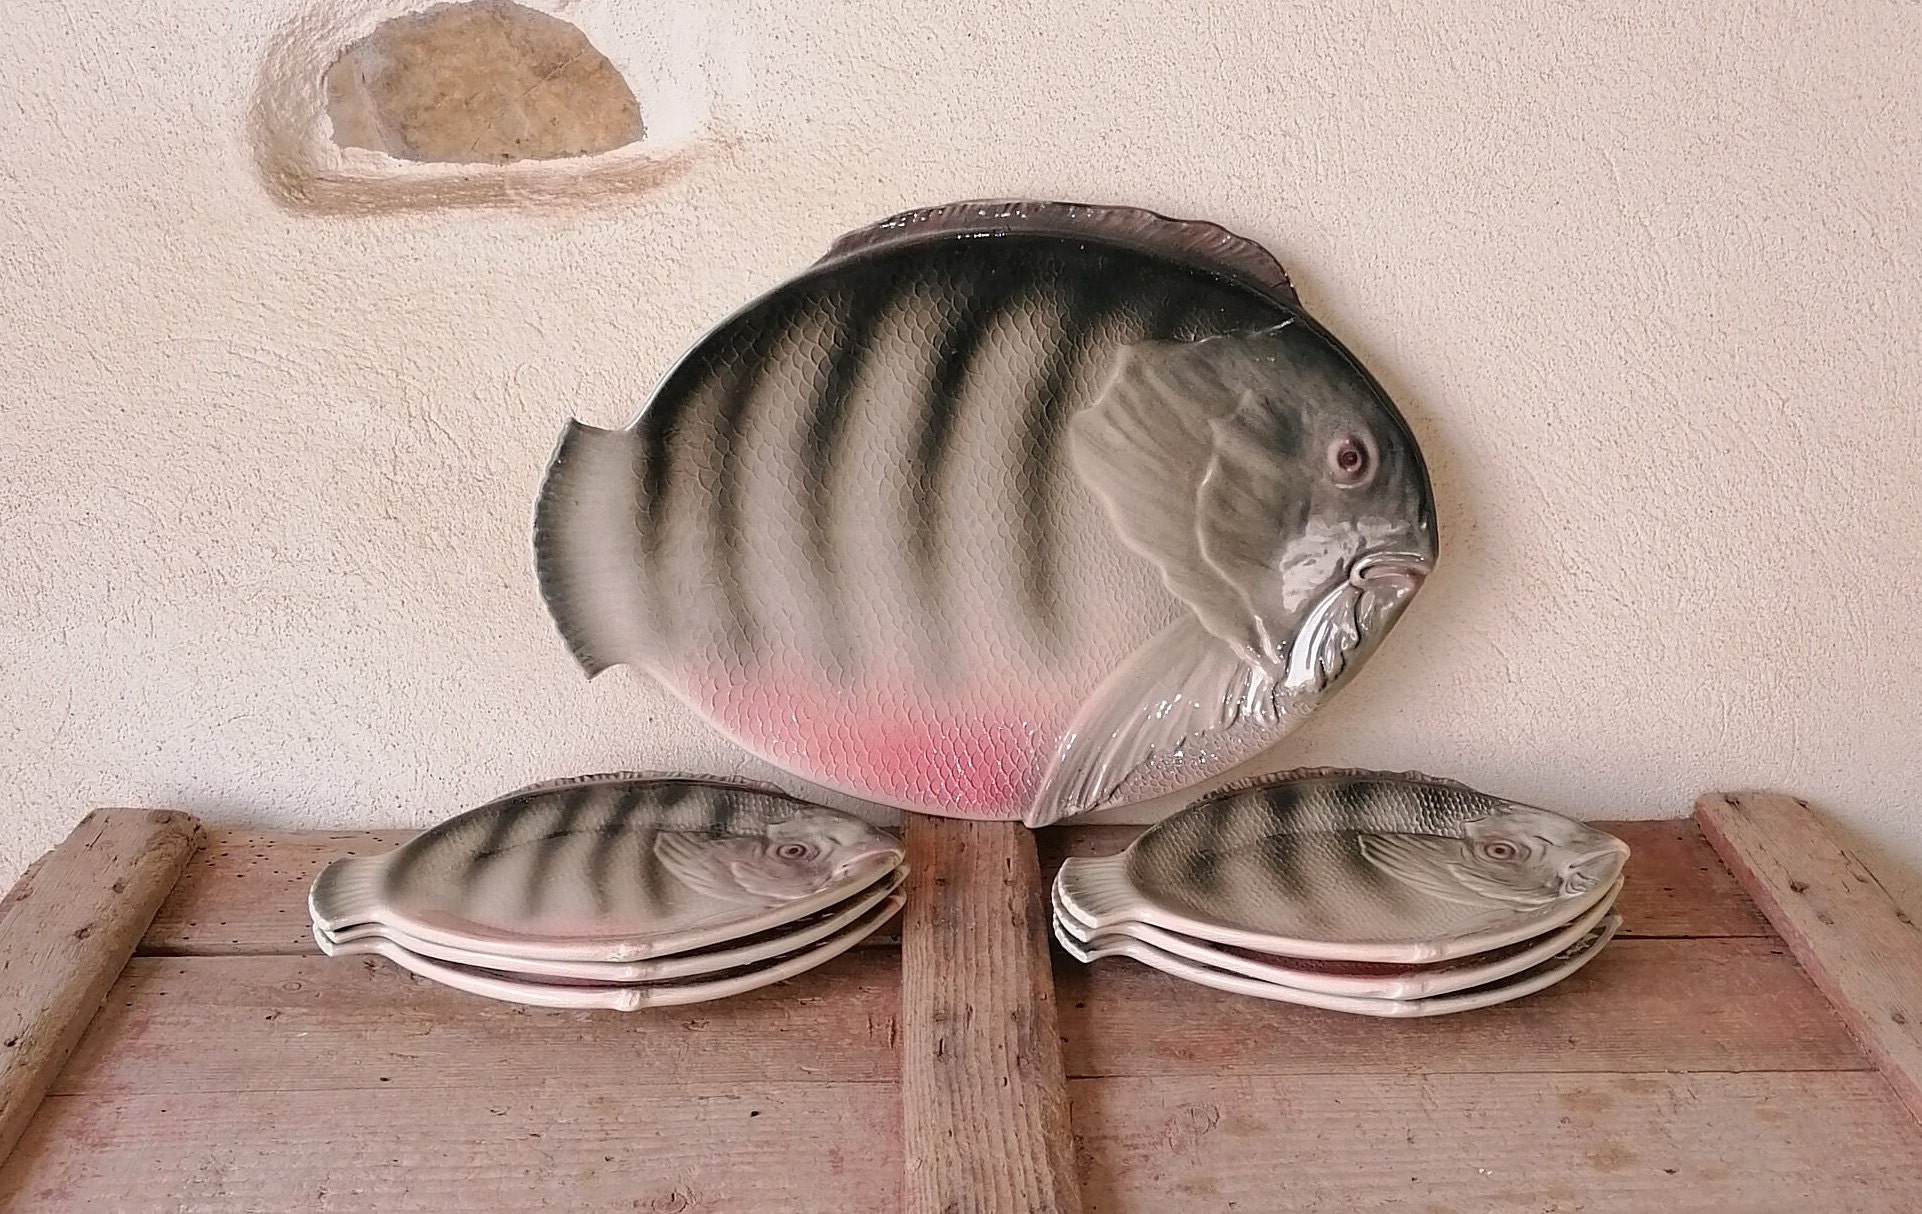 Set Of Vintage Fish Dishes, Gray & Pink Italian Ceramics, Dishes Service For 6 People, Coastal Dcor